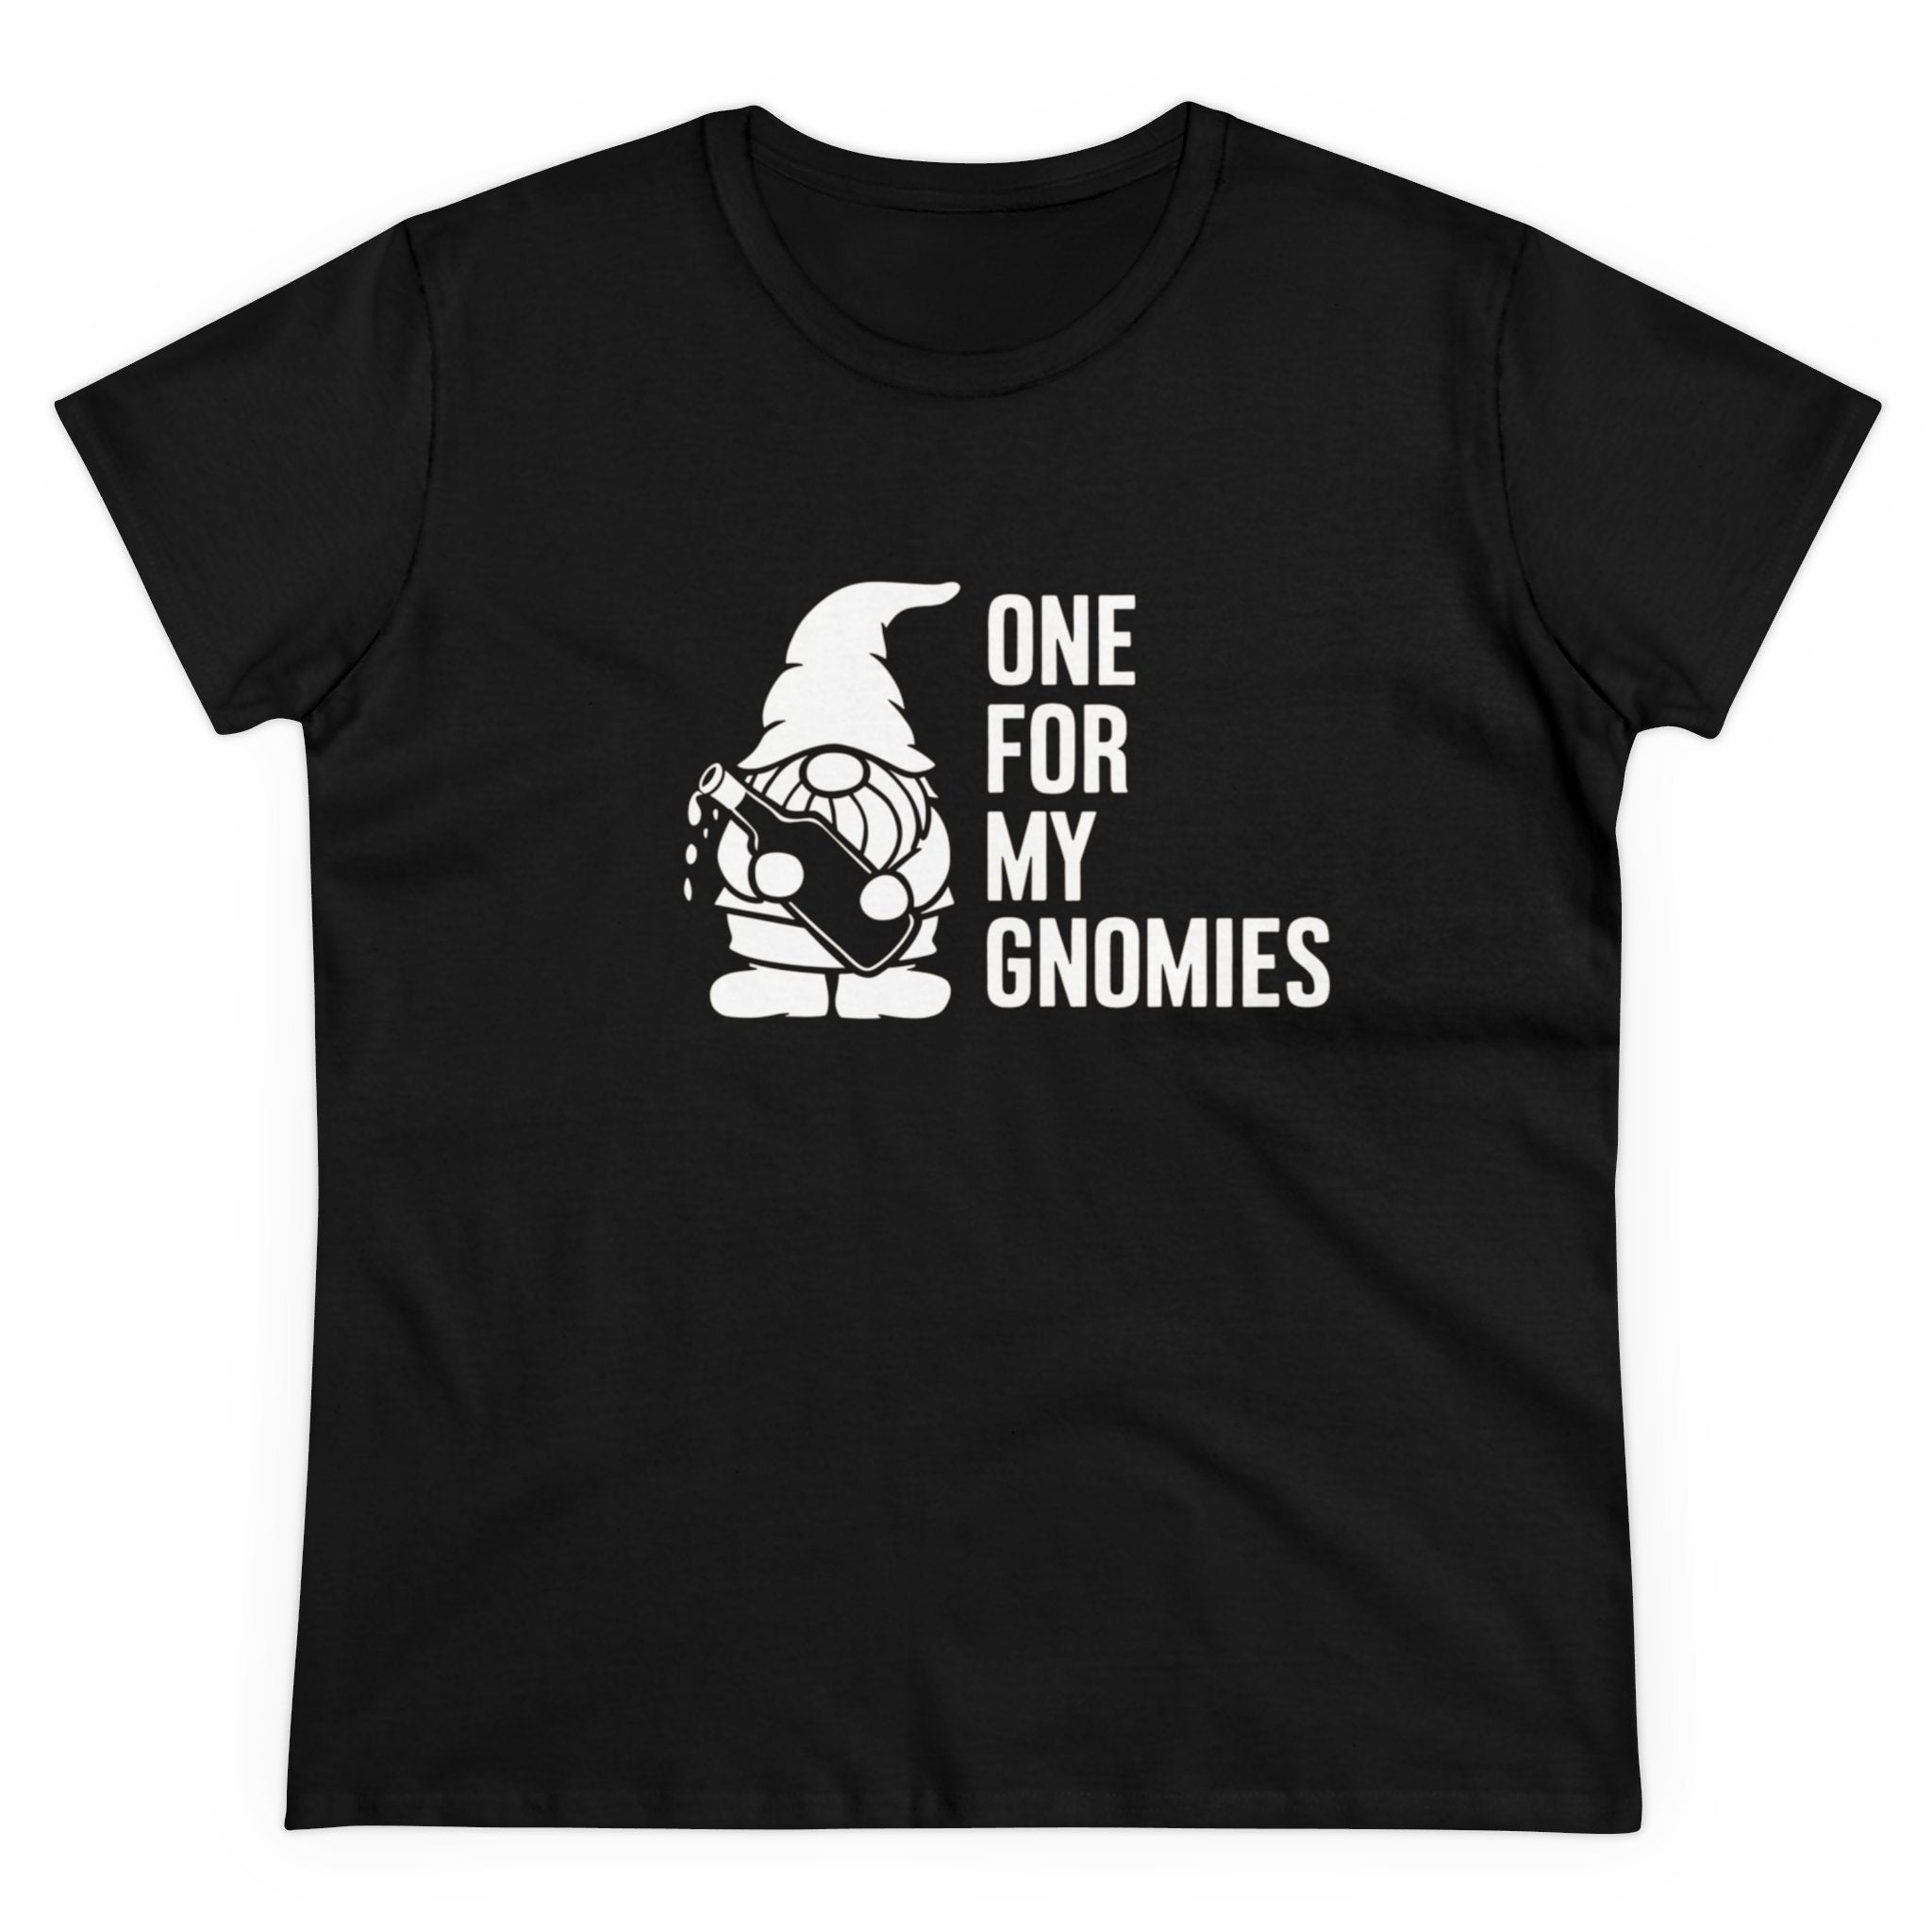 This black One For My Gnomies - Women's Tee features a cartoon gnome holding a beer mug. Made from soft pre-shrunk cotton, it ensures lasting wear and comfort.